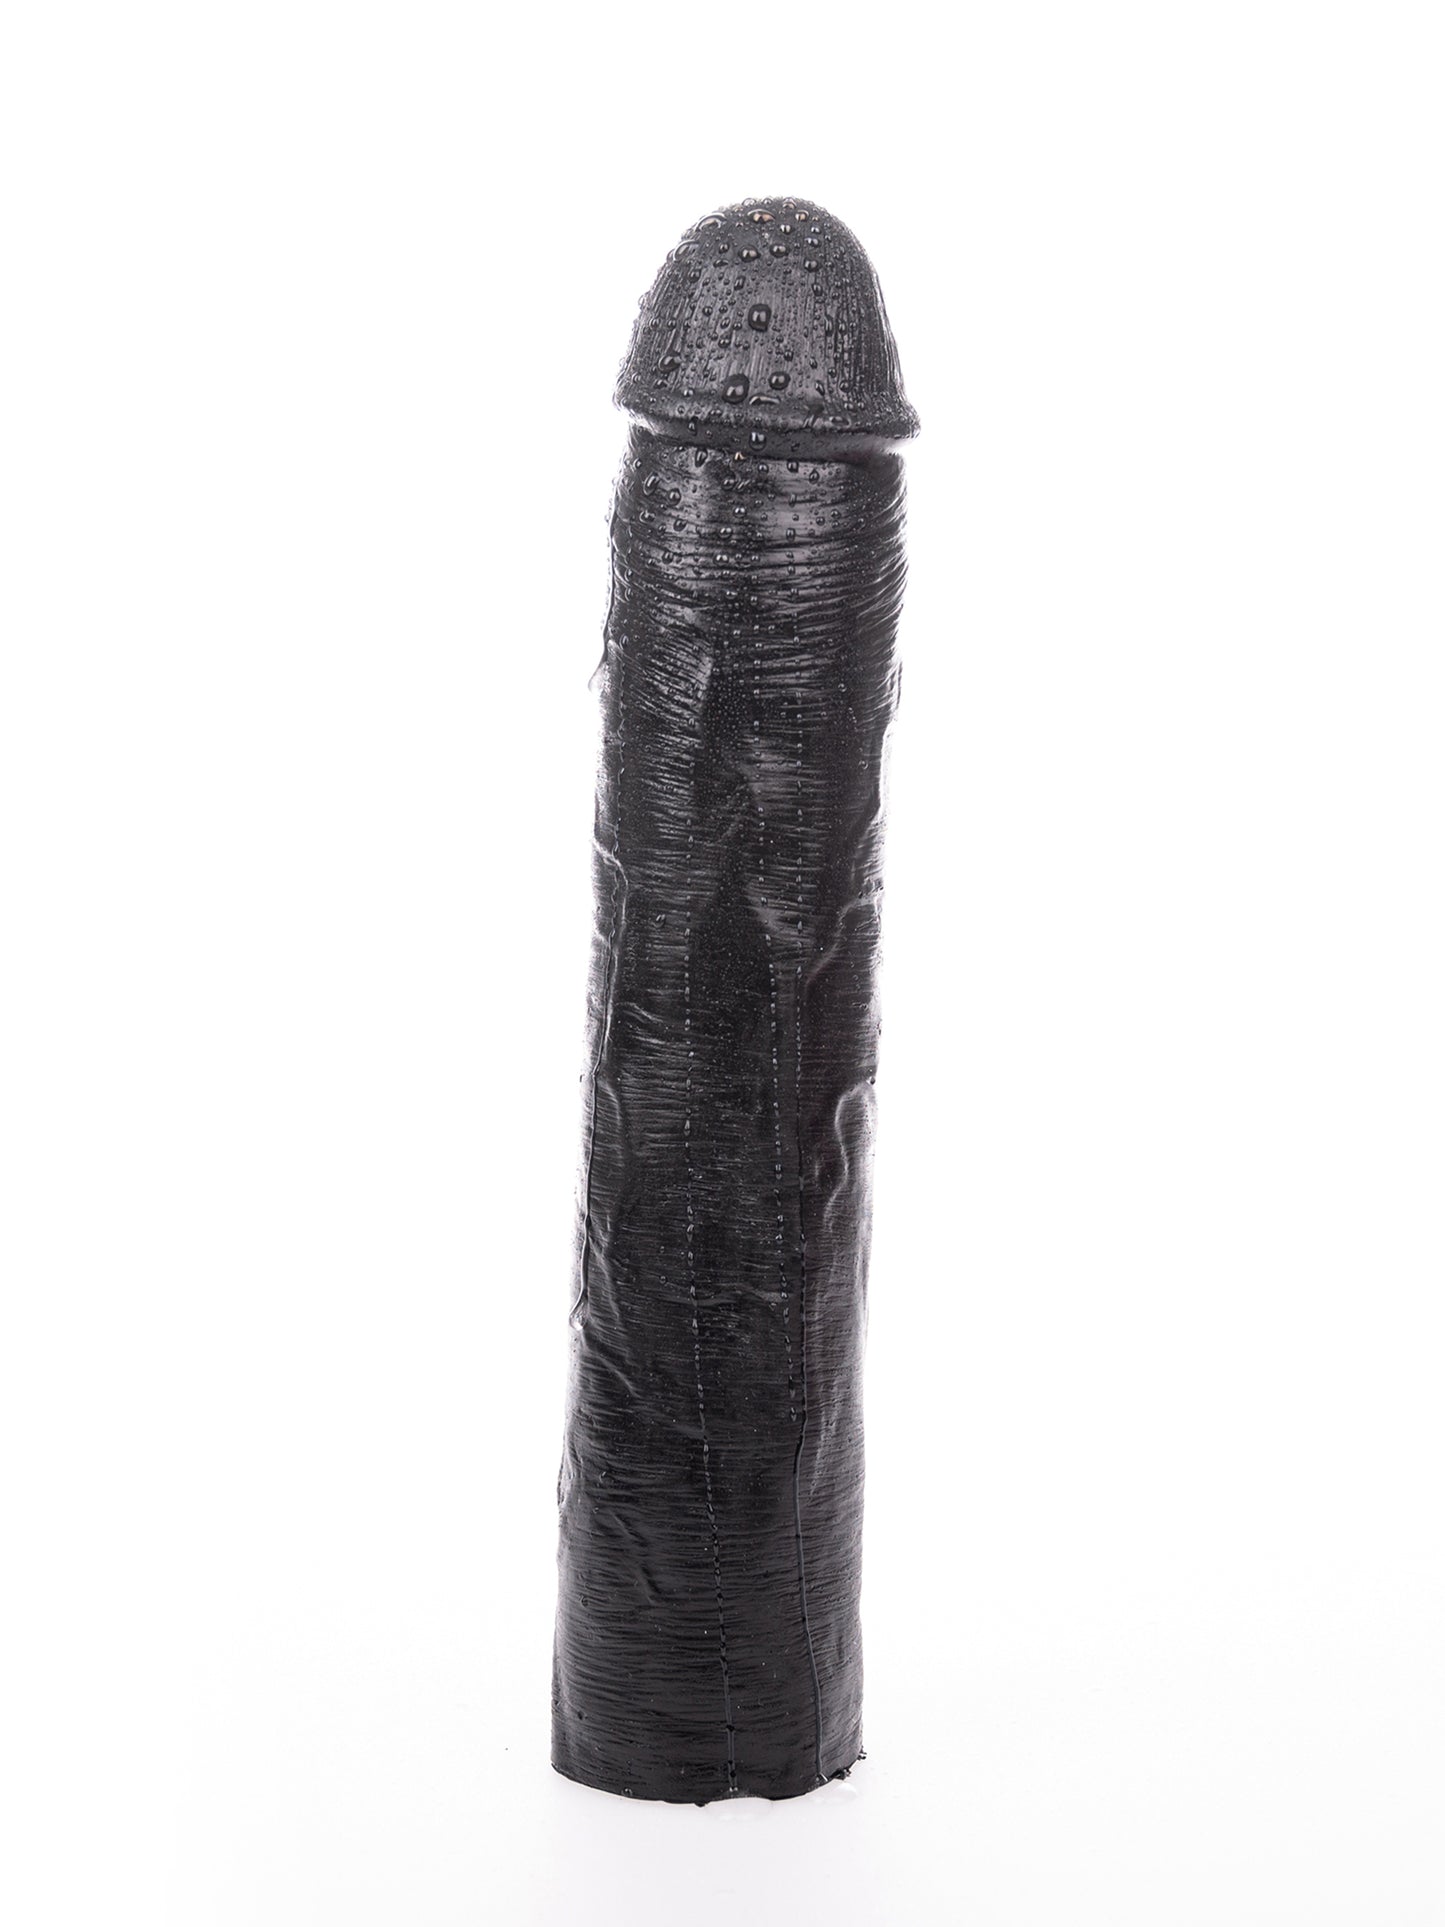 Hung System - Dildo Realistic Benny with Suction Cup 26 cm - Black